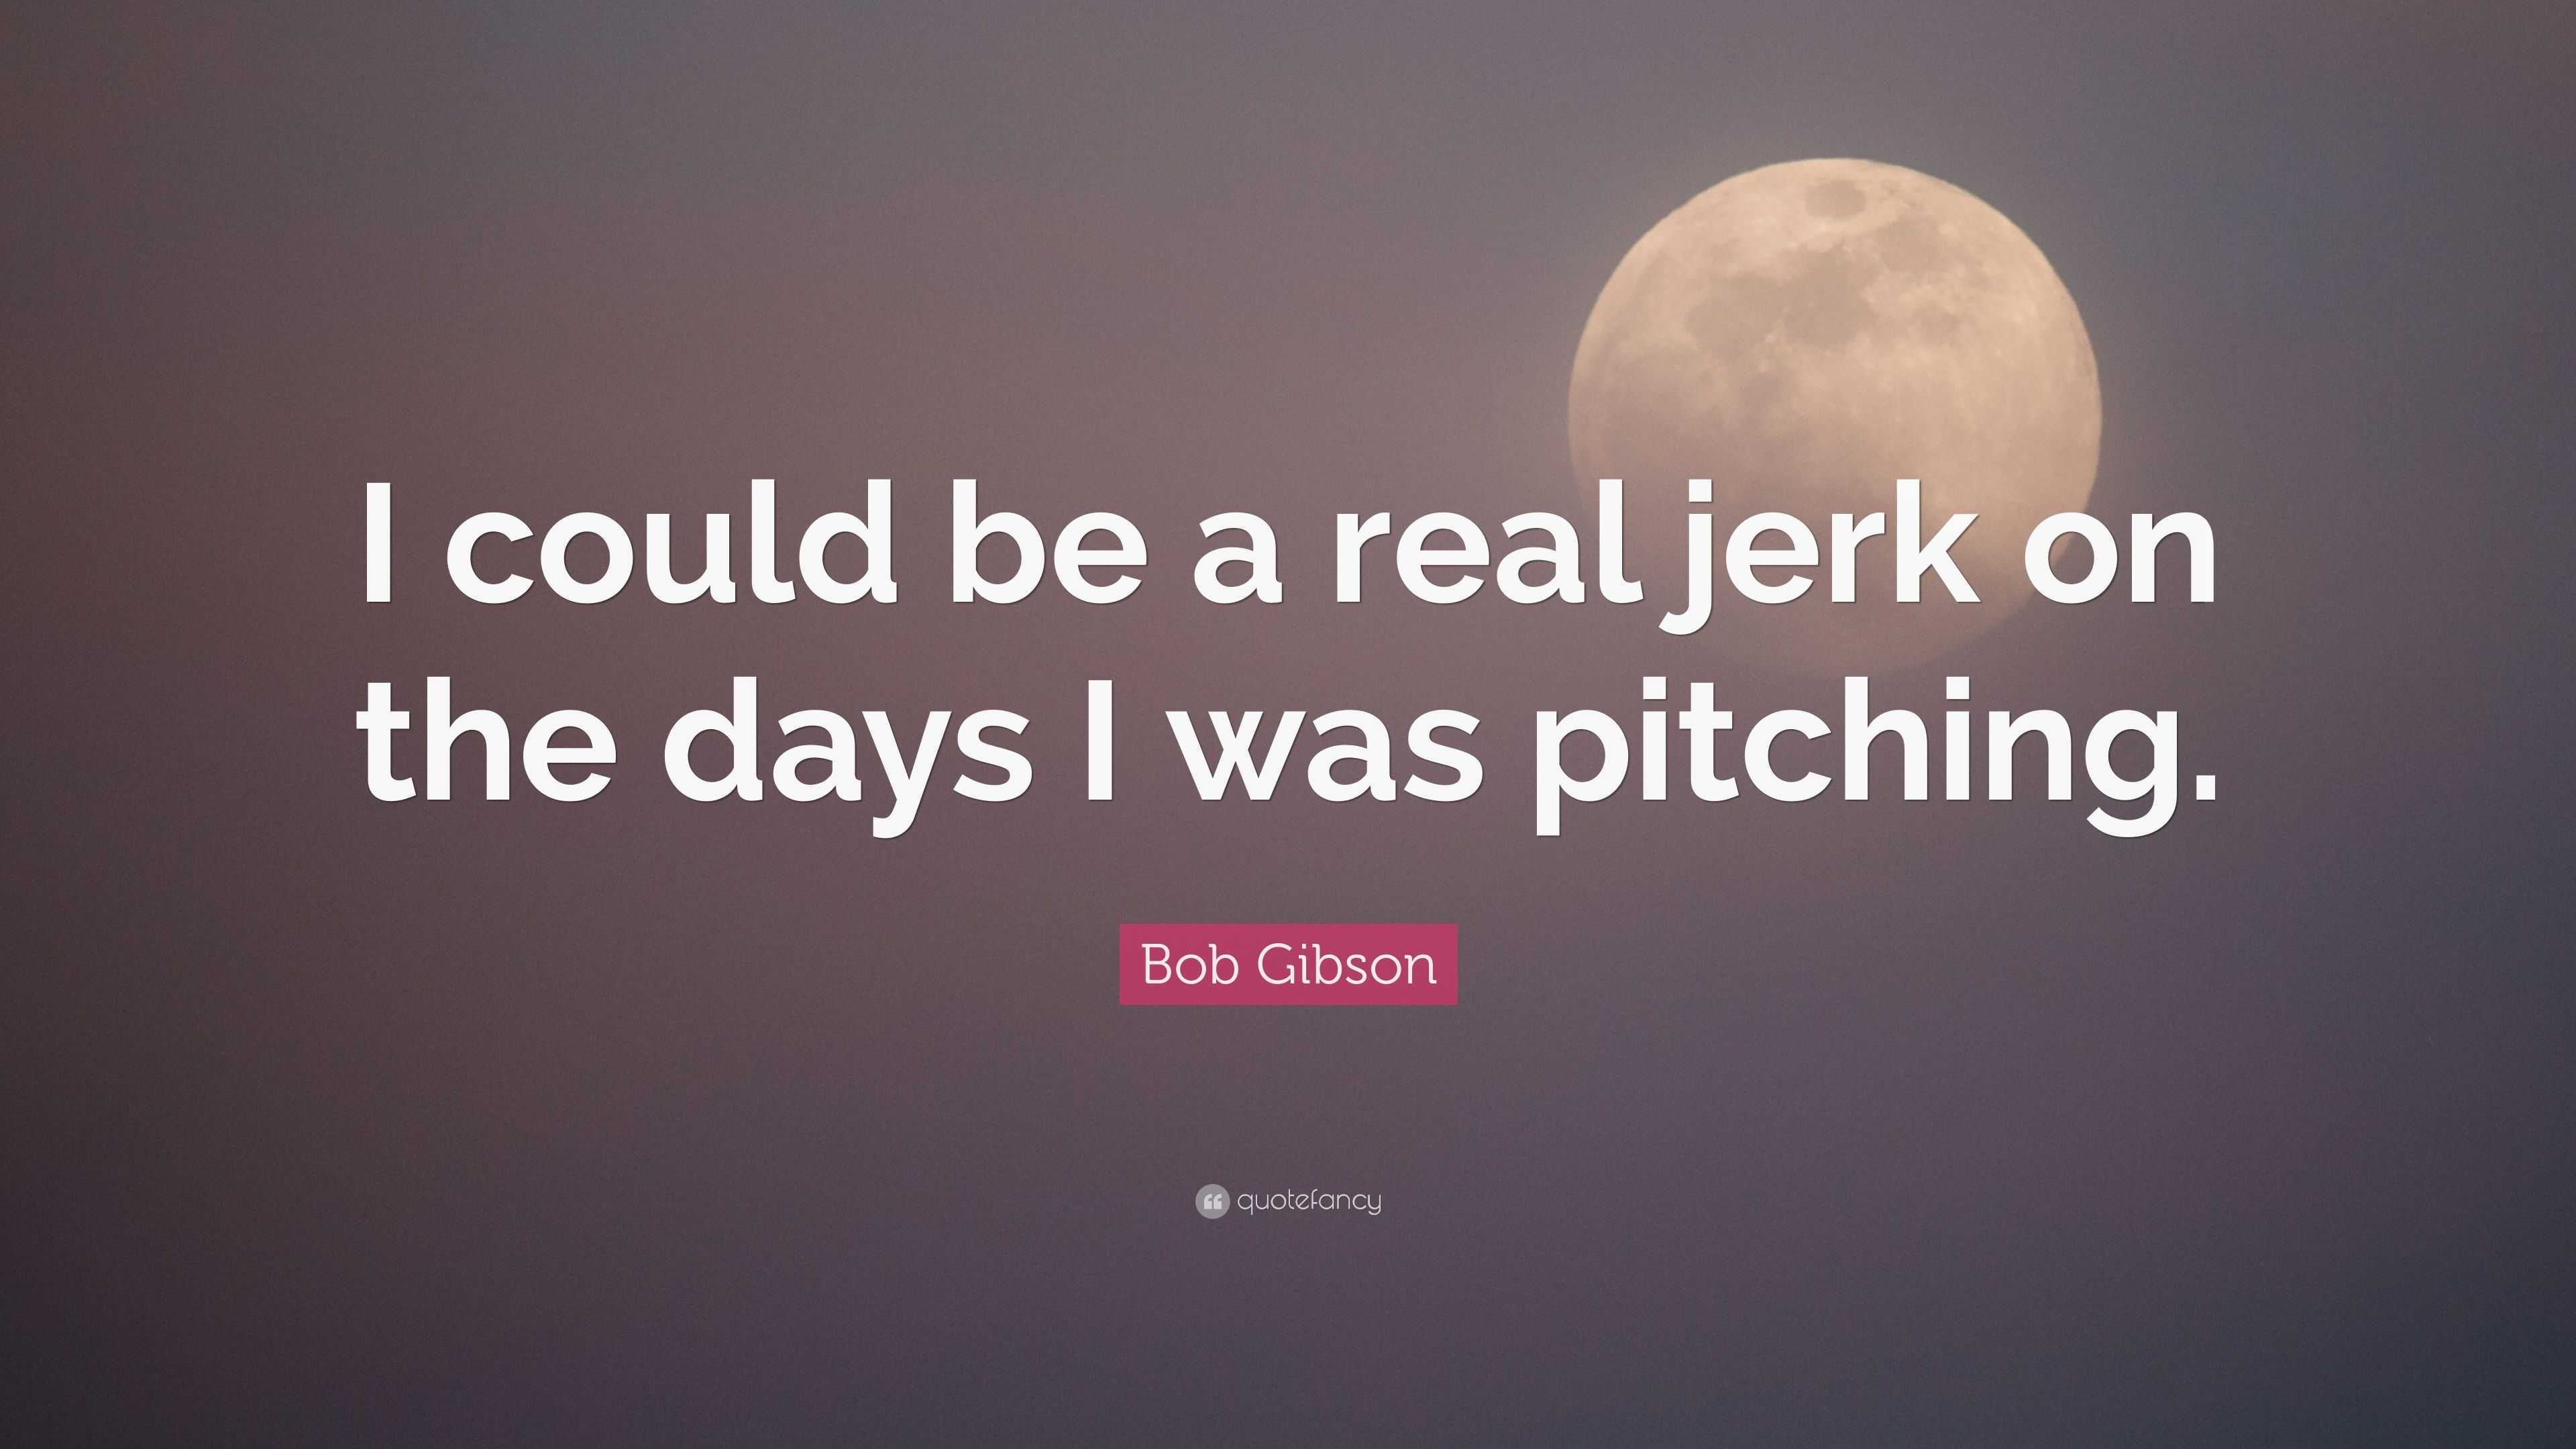 Bob Gibson Quote: “I could be a real jerk on the days I was pitching.”